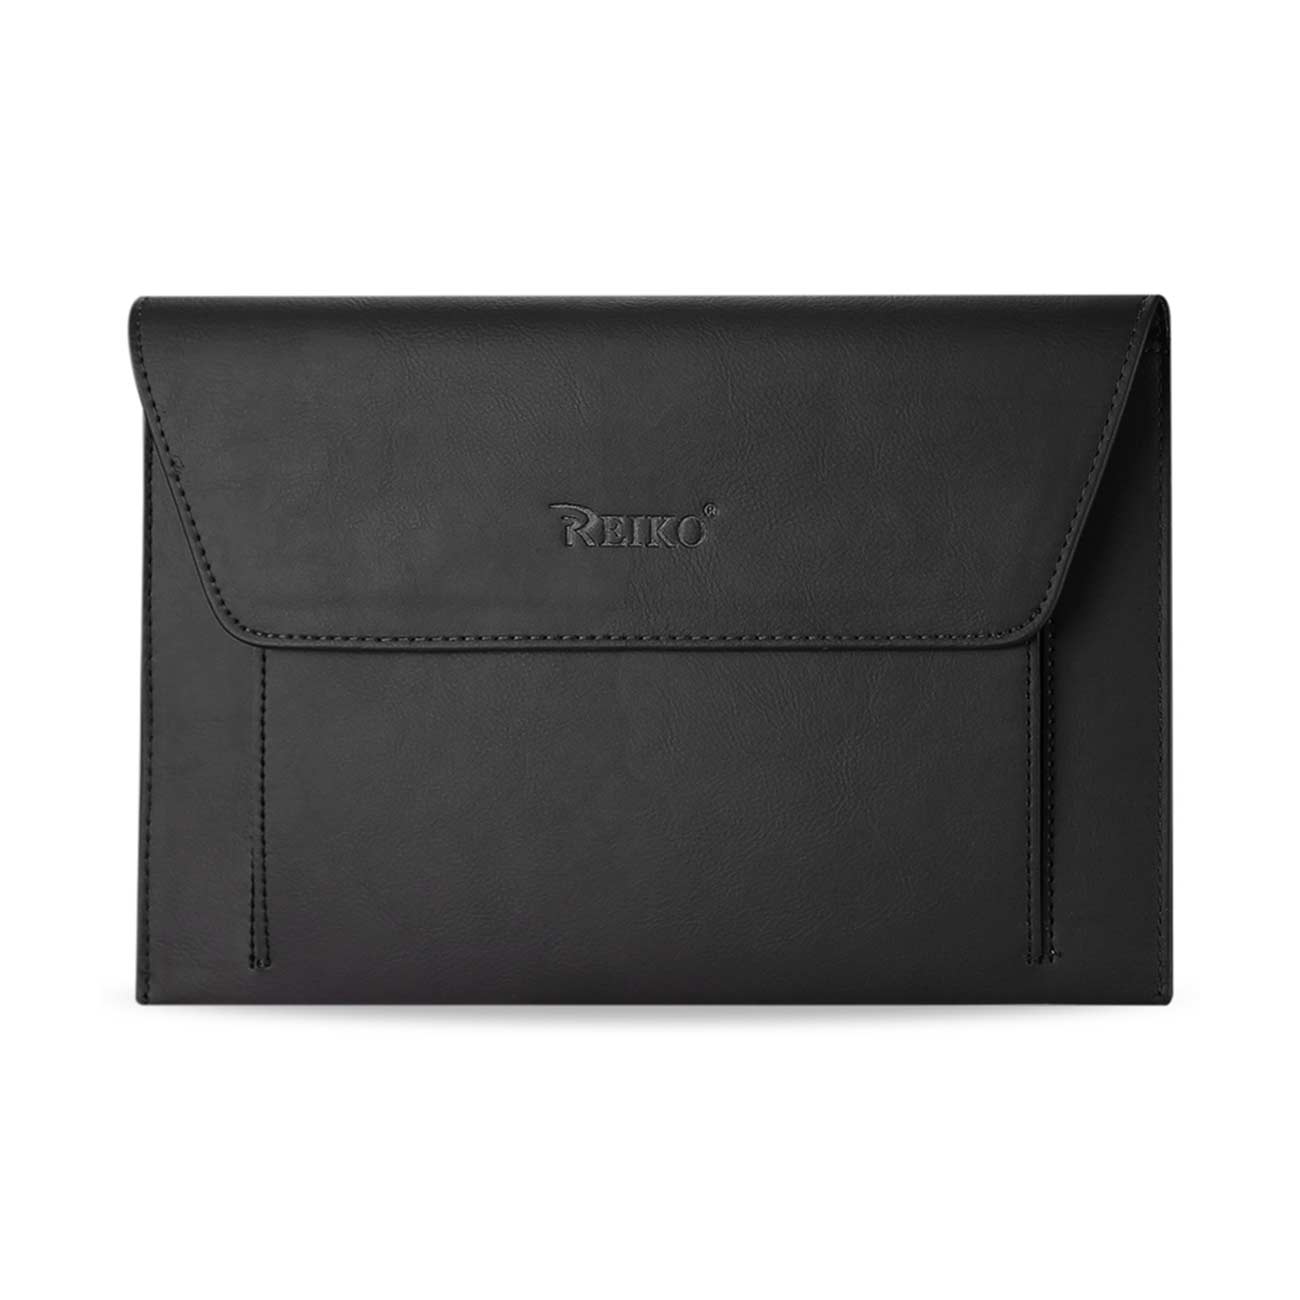 REIKO PREMIUM LEATHER CASE POUCH FOR 7INCHES IPADS AND TABLETS In BLACK